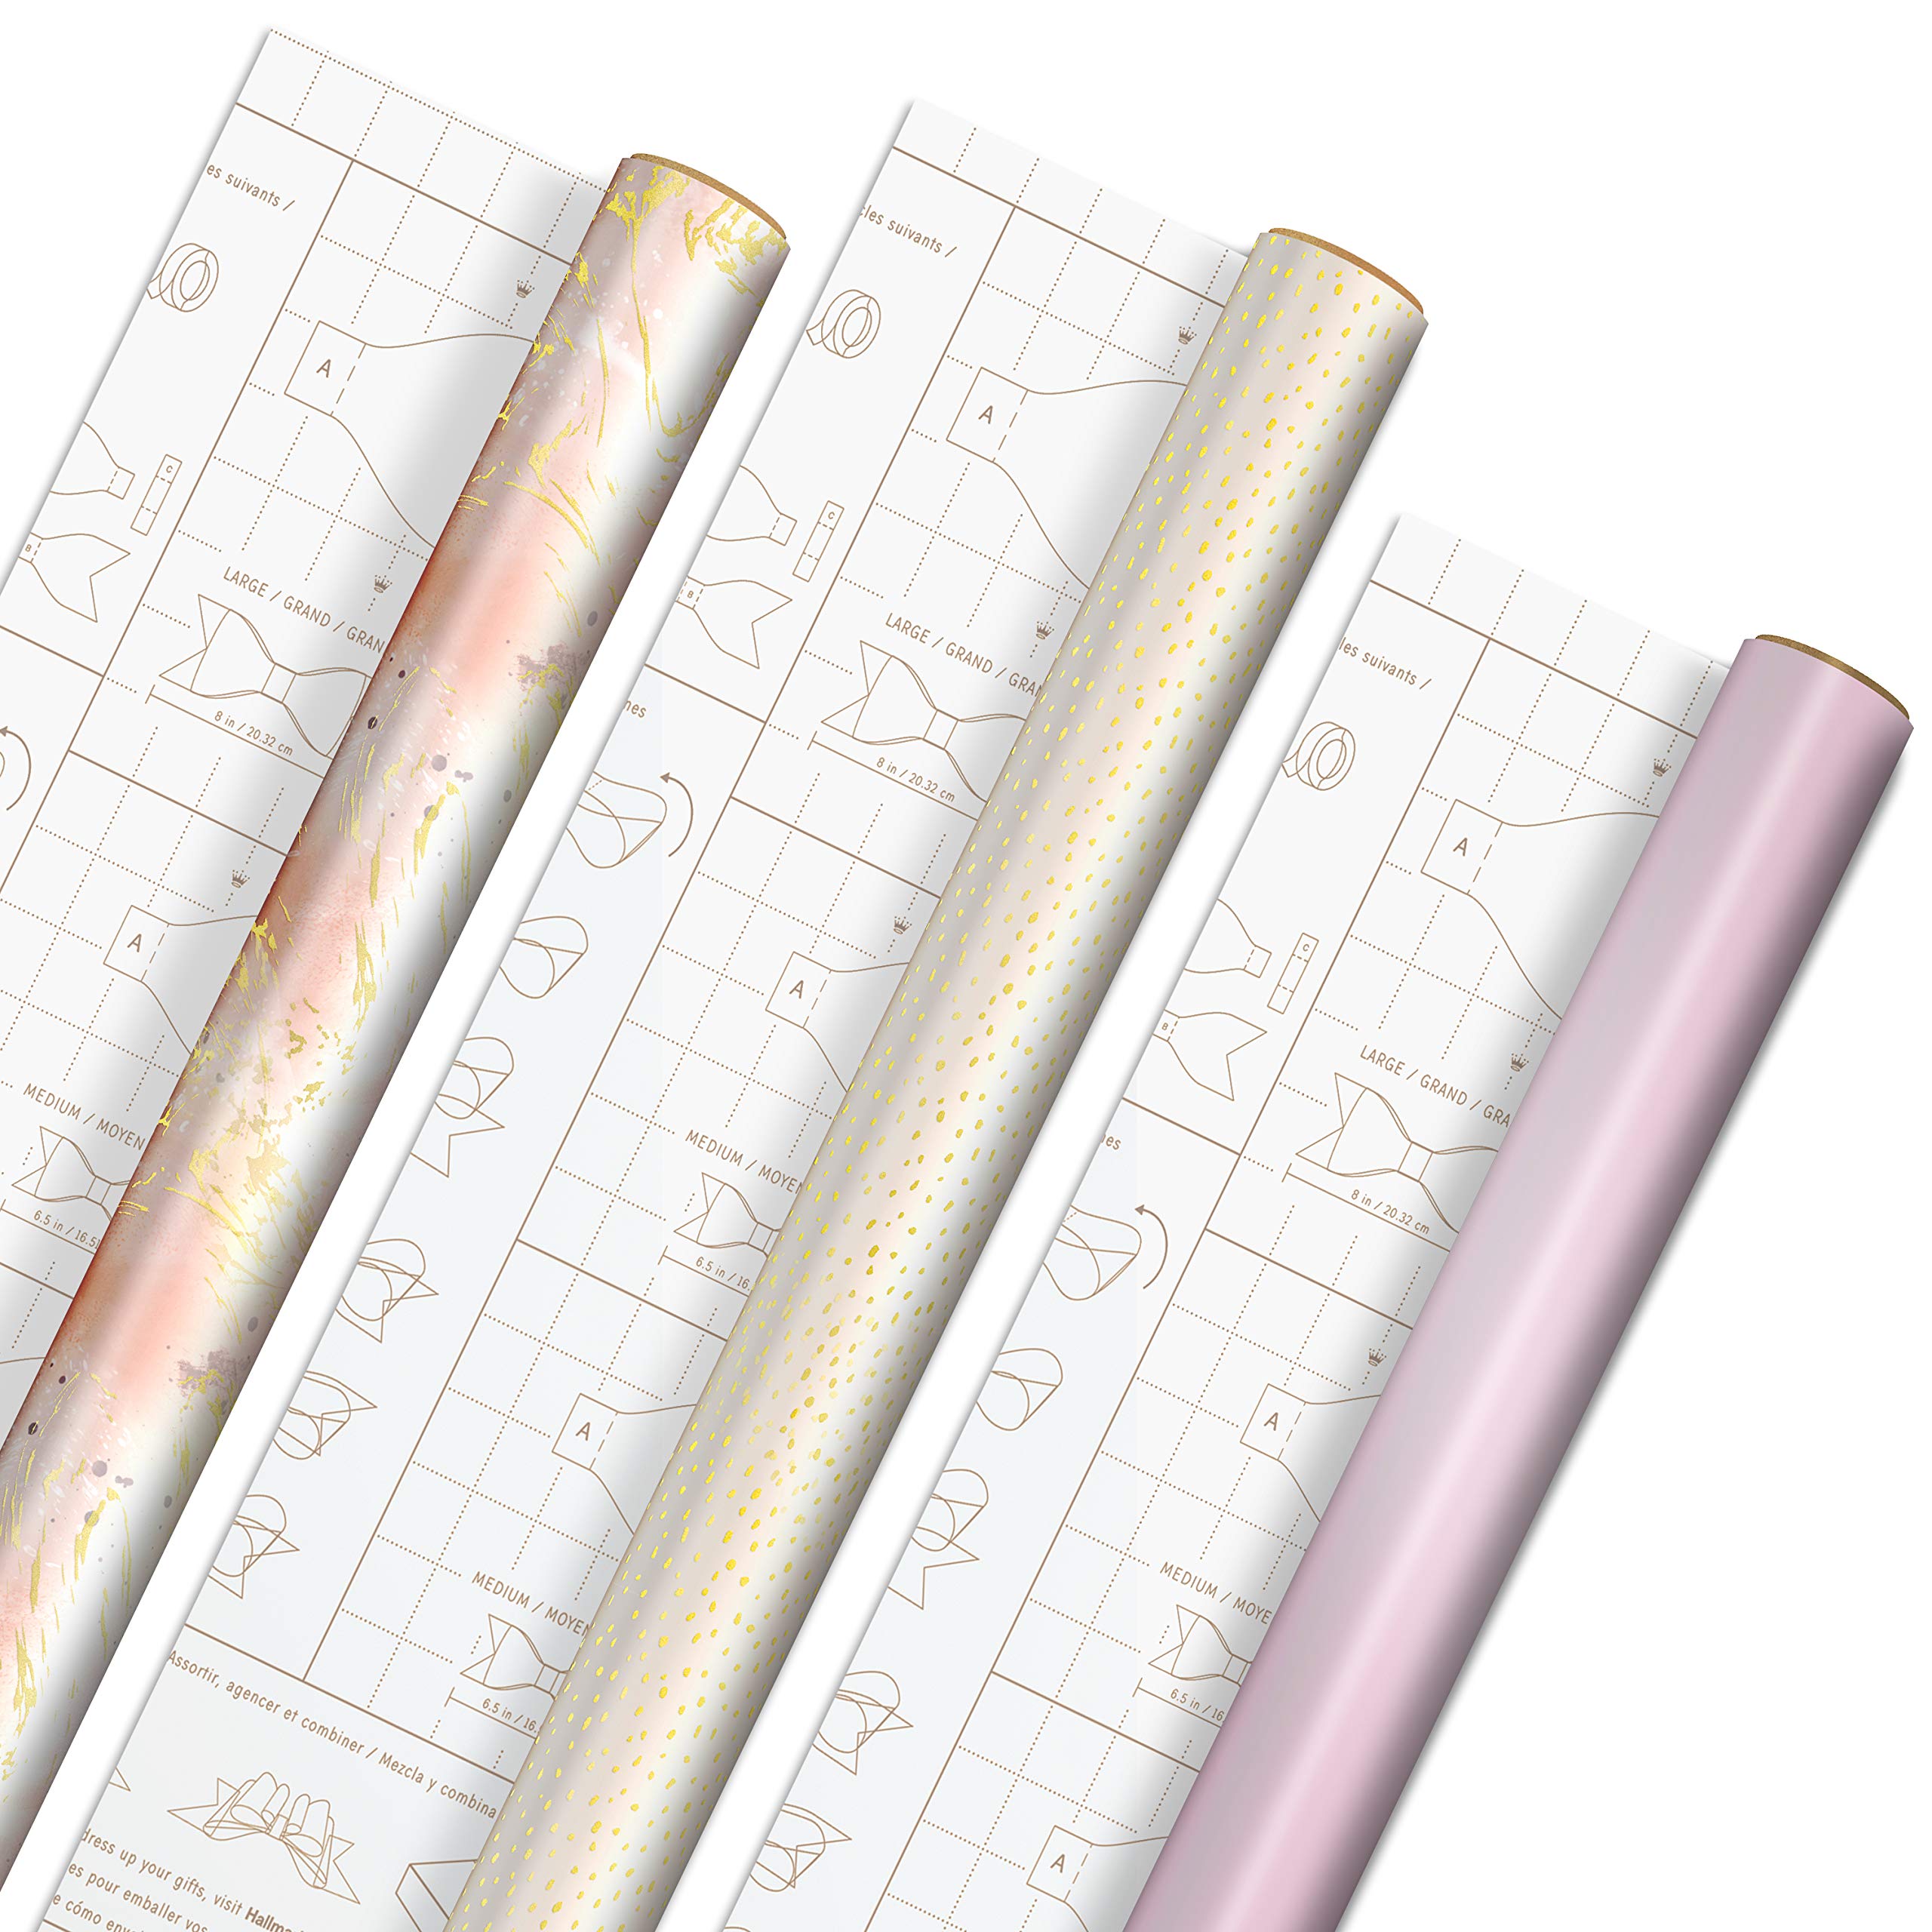 Hallmark Pink and Gold Wrapping Paper with Cutlines and Optional DIY Bow Templates on Reverse (3 Rolls: 75 sq. ft. ttl) for Christmas, Birthdays, Weddings, Bridal Showers, Baby Showers, Crafts